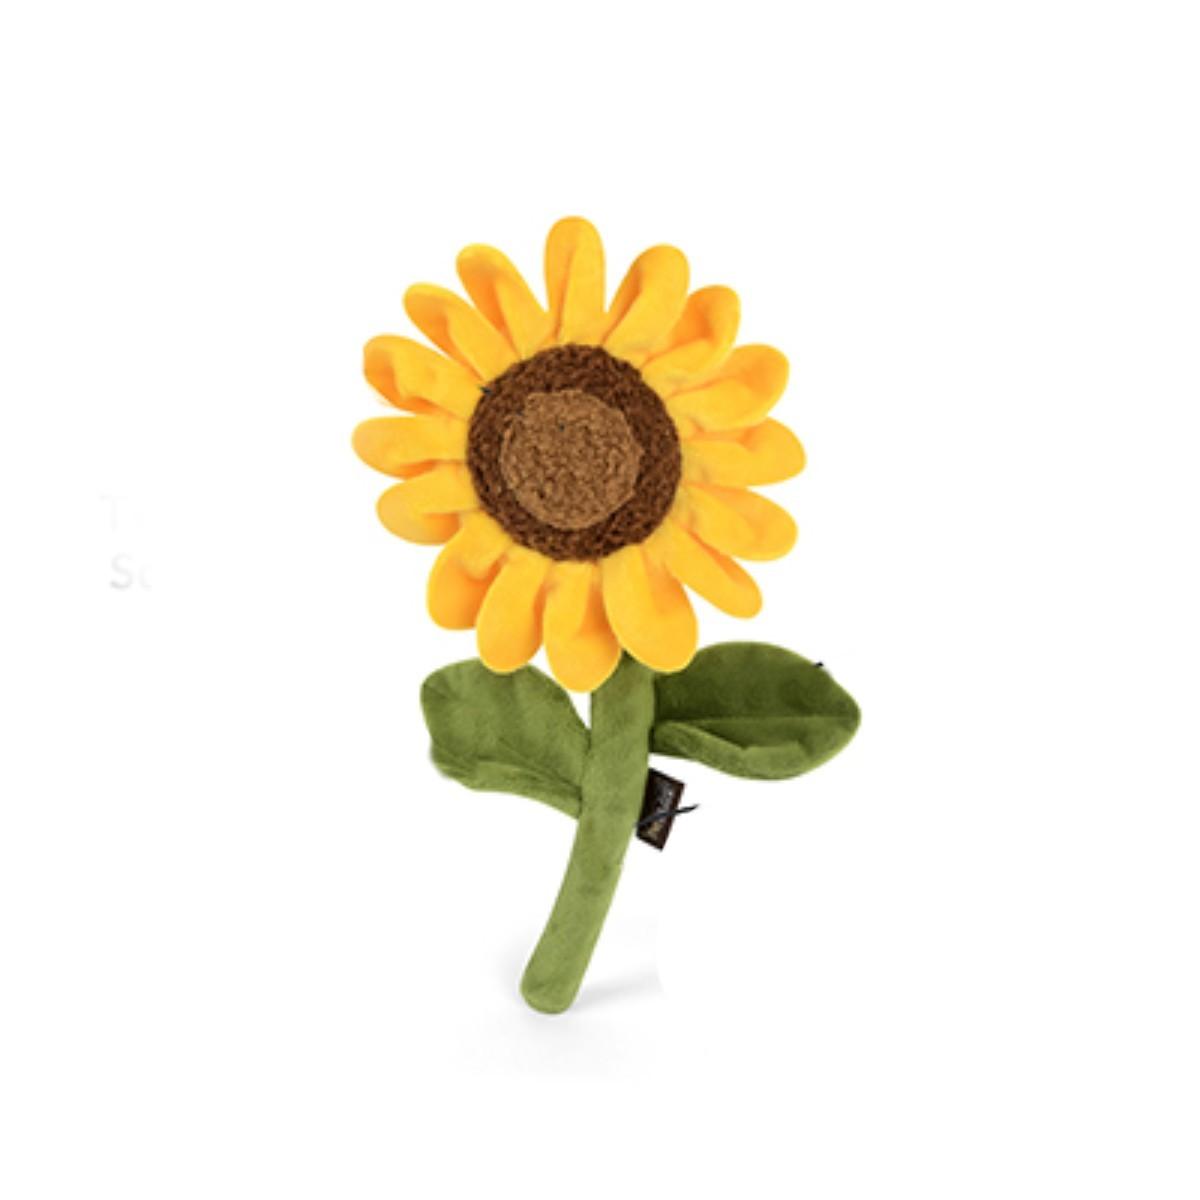 P.L.A.Y. Blooming Buddies Dog Toy - Sassy Sunflower